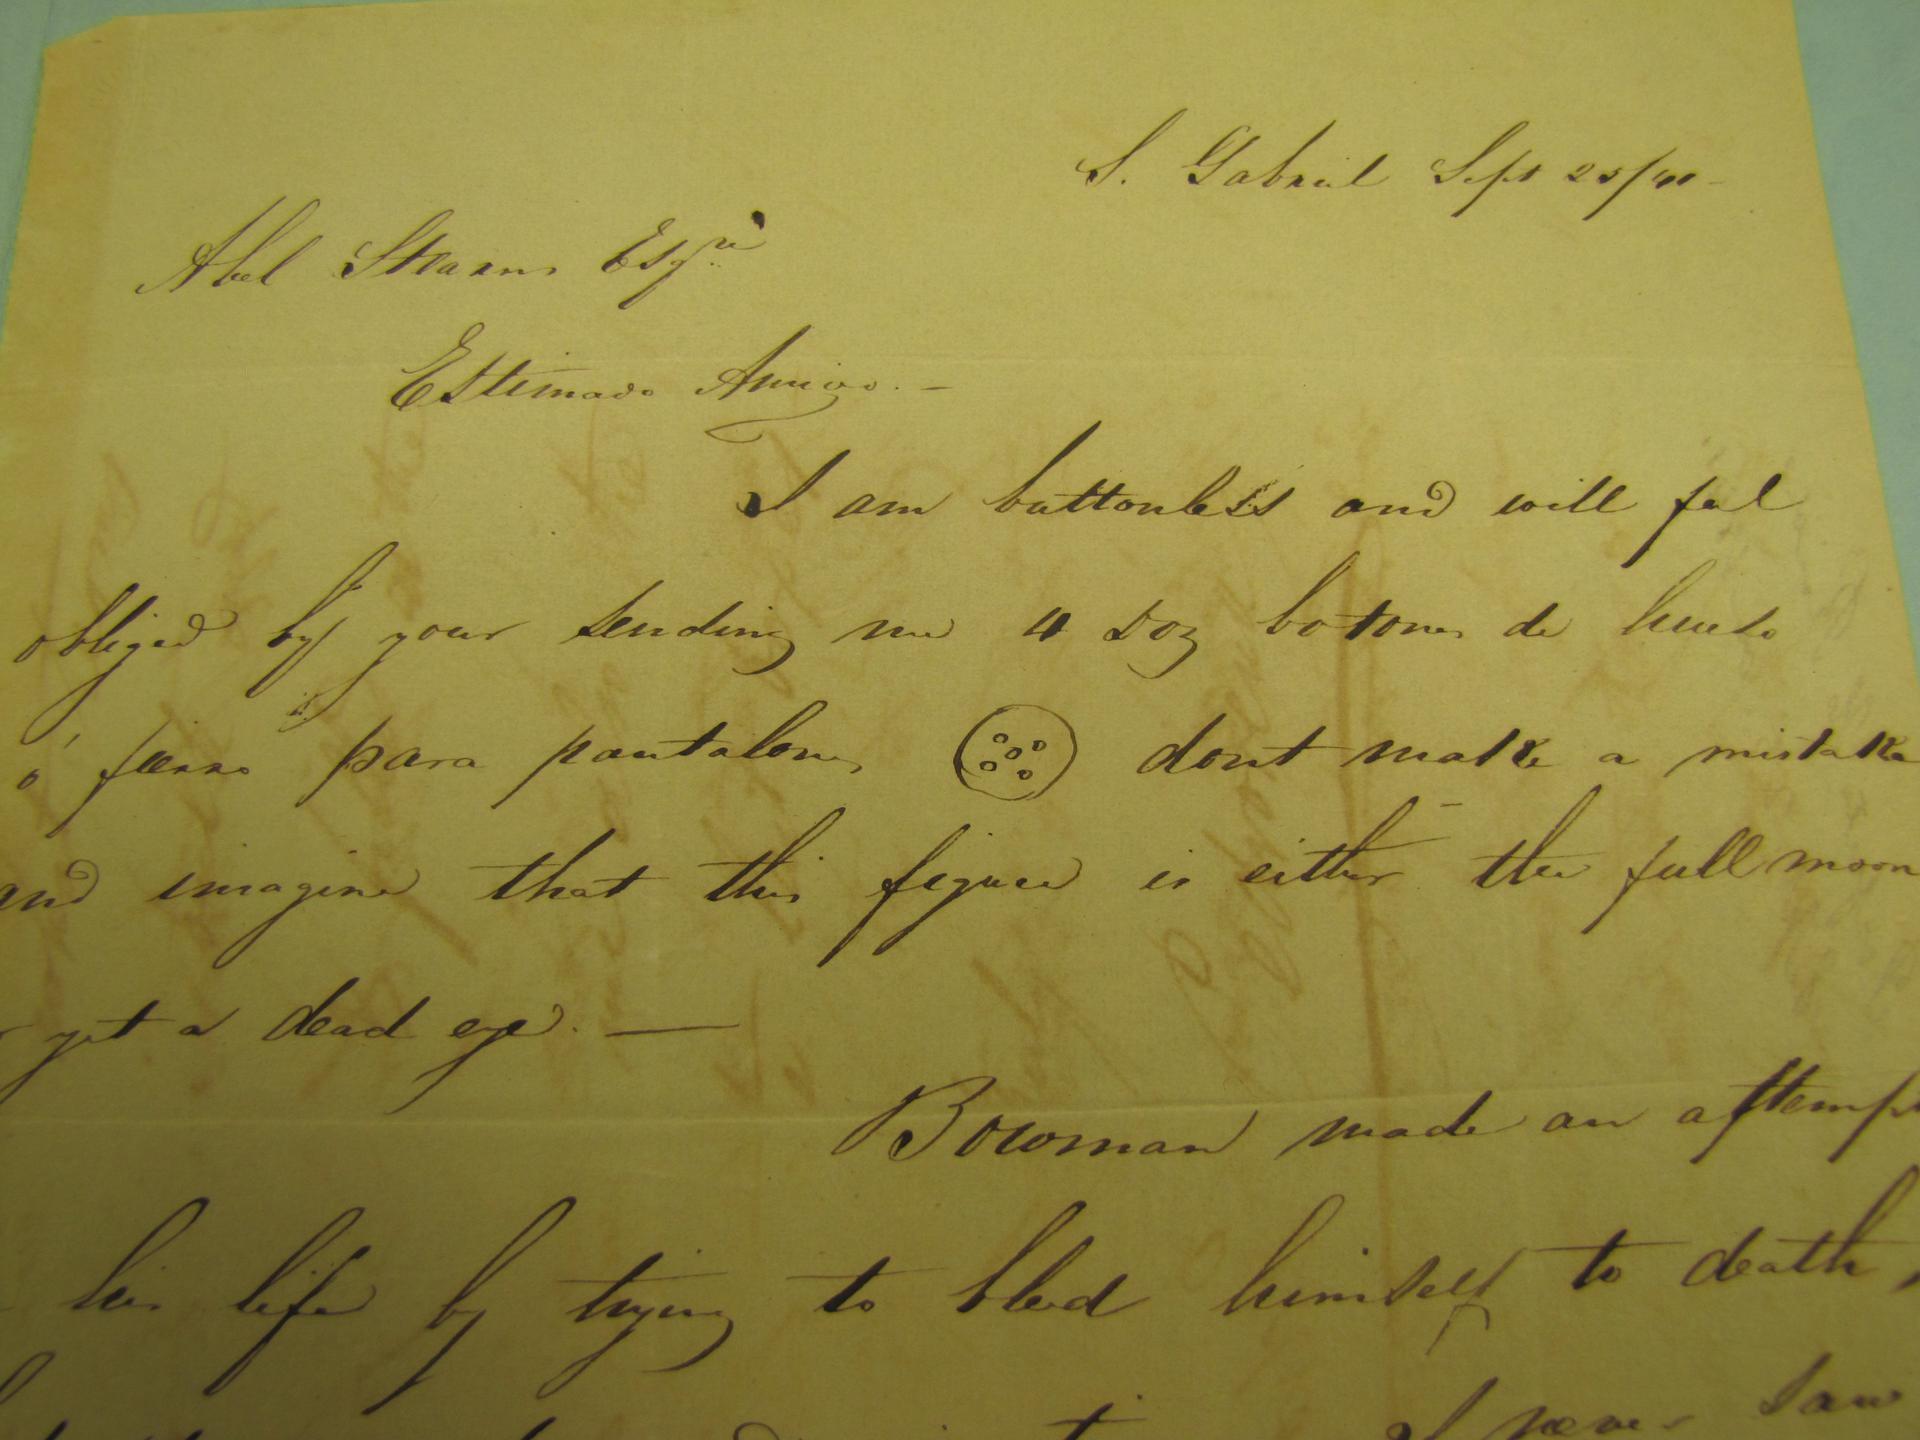 Letter from Hugh Reid to Abel Stearns asking for goods from his Stearns' store.